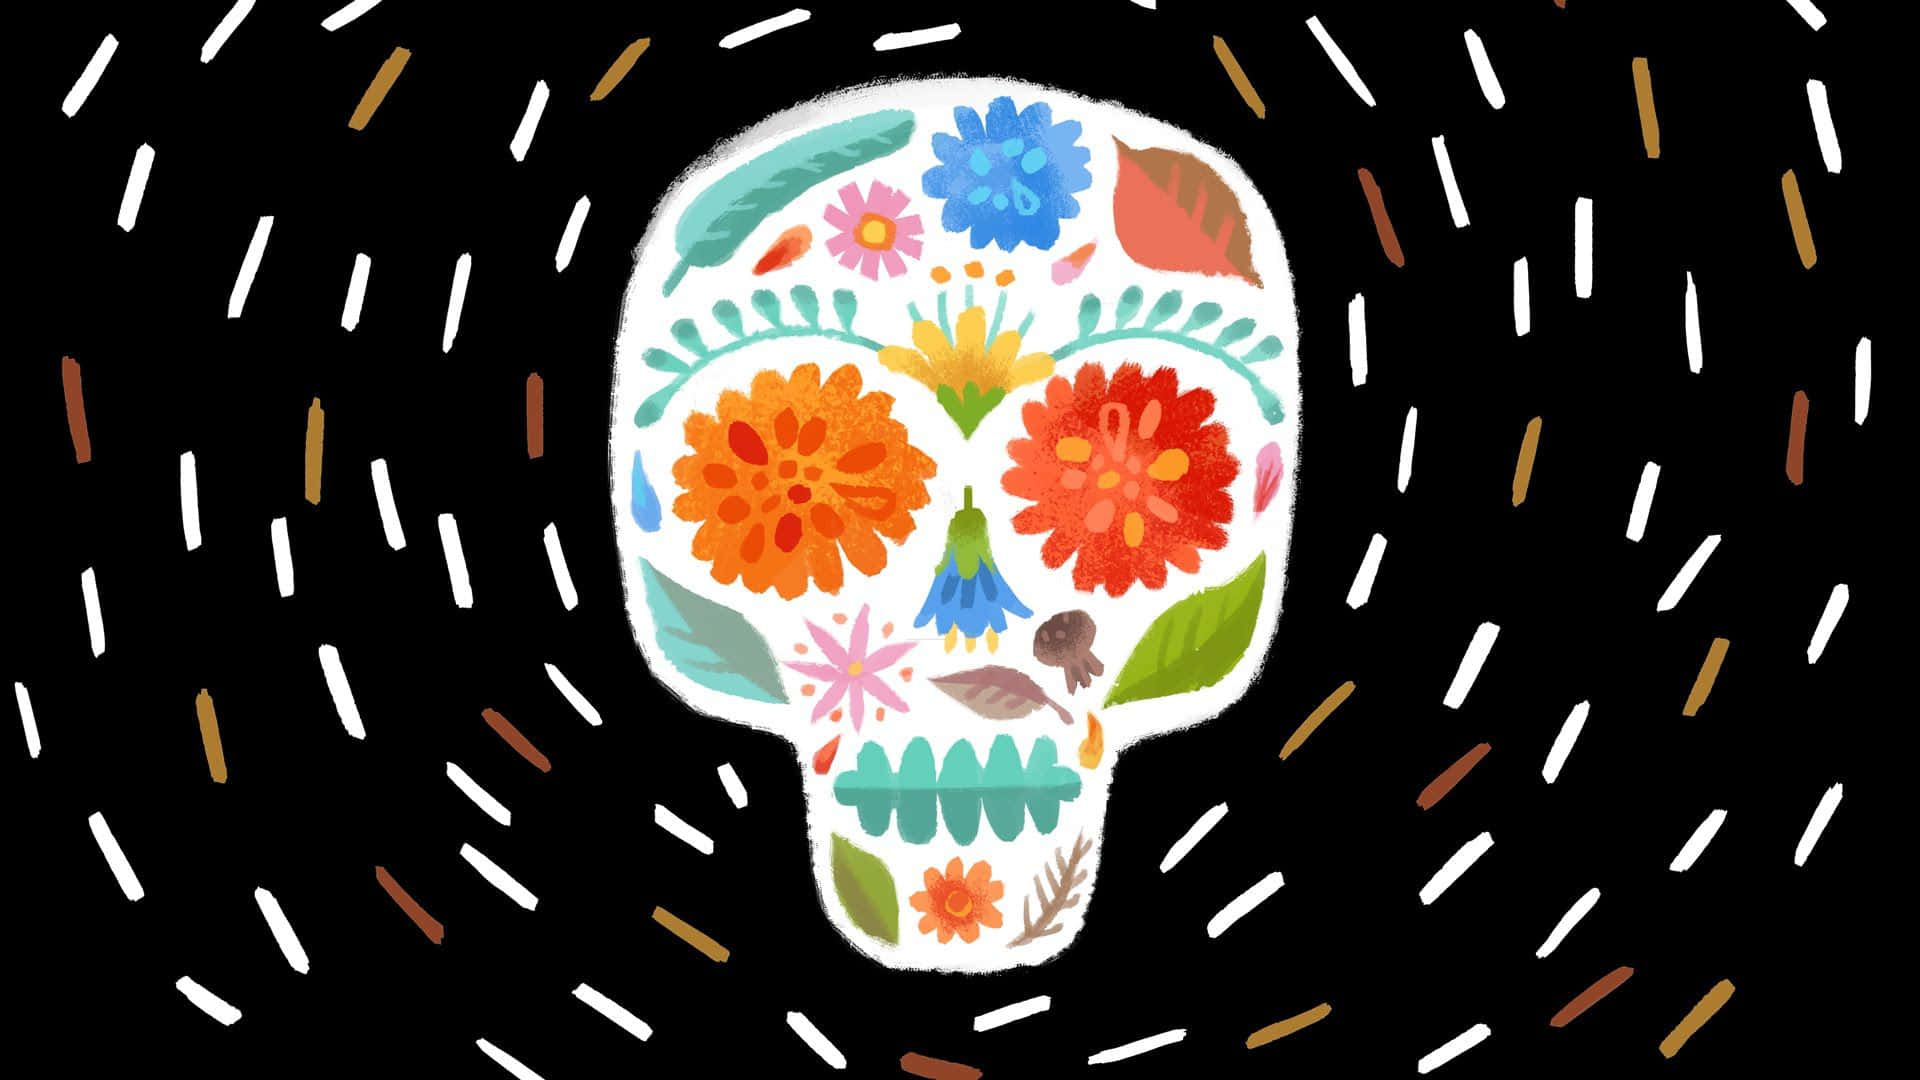 A Colorful Sugar Skull With Flowers On It